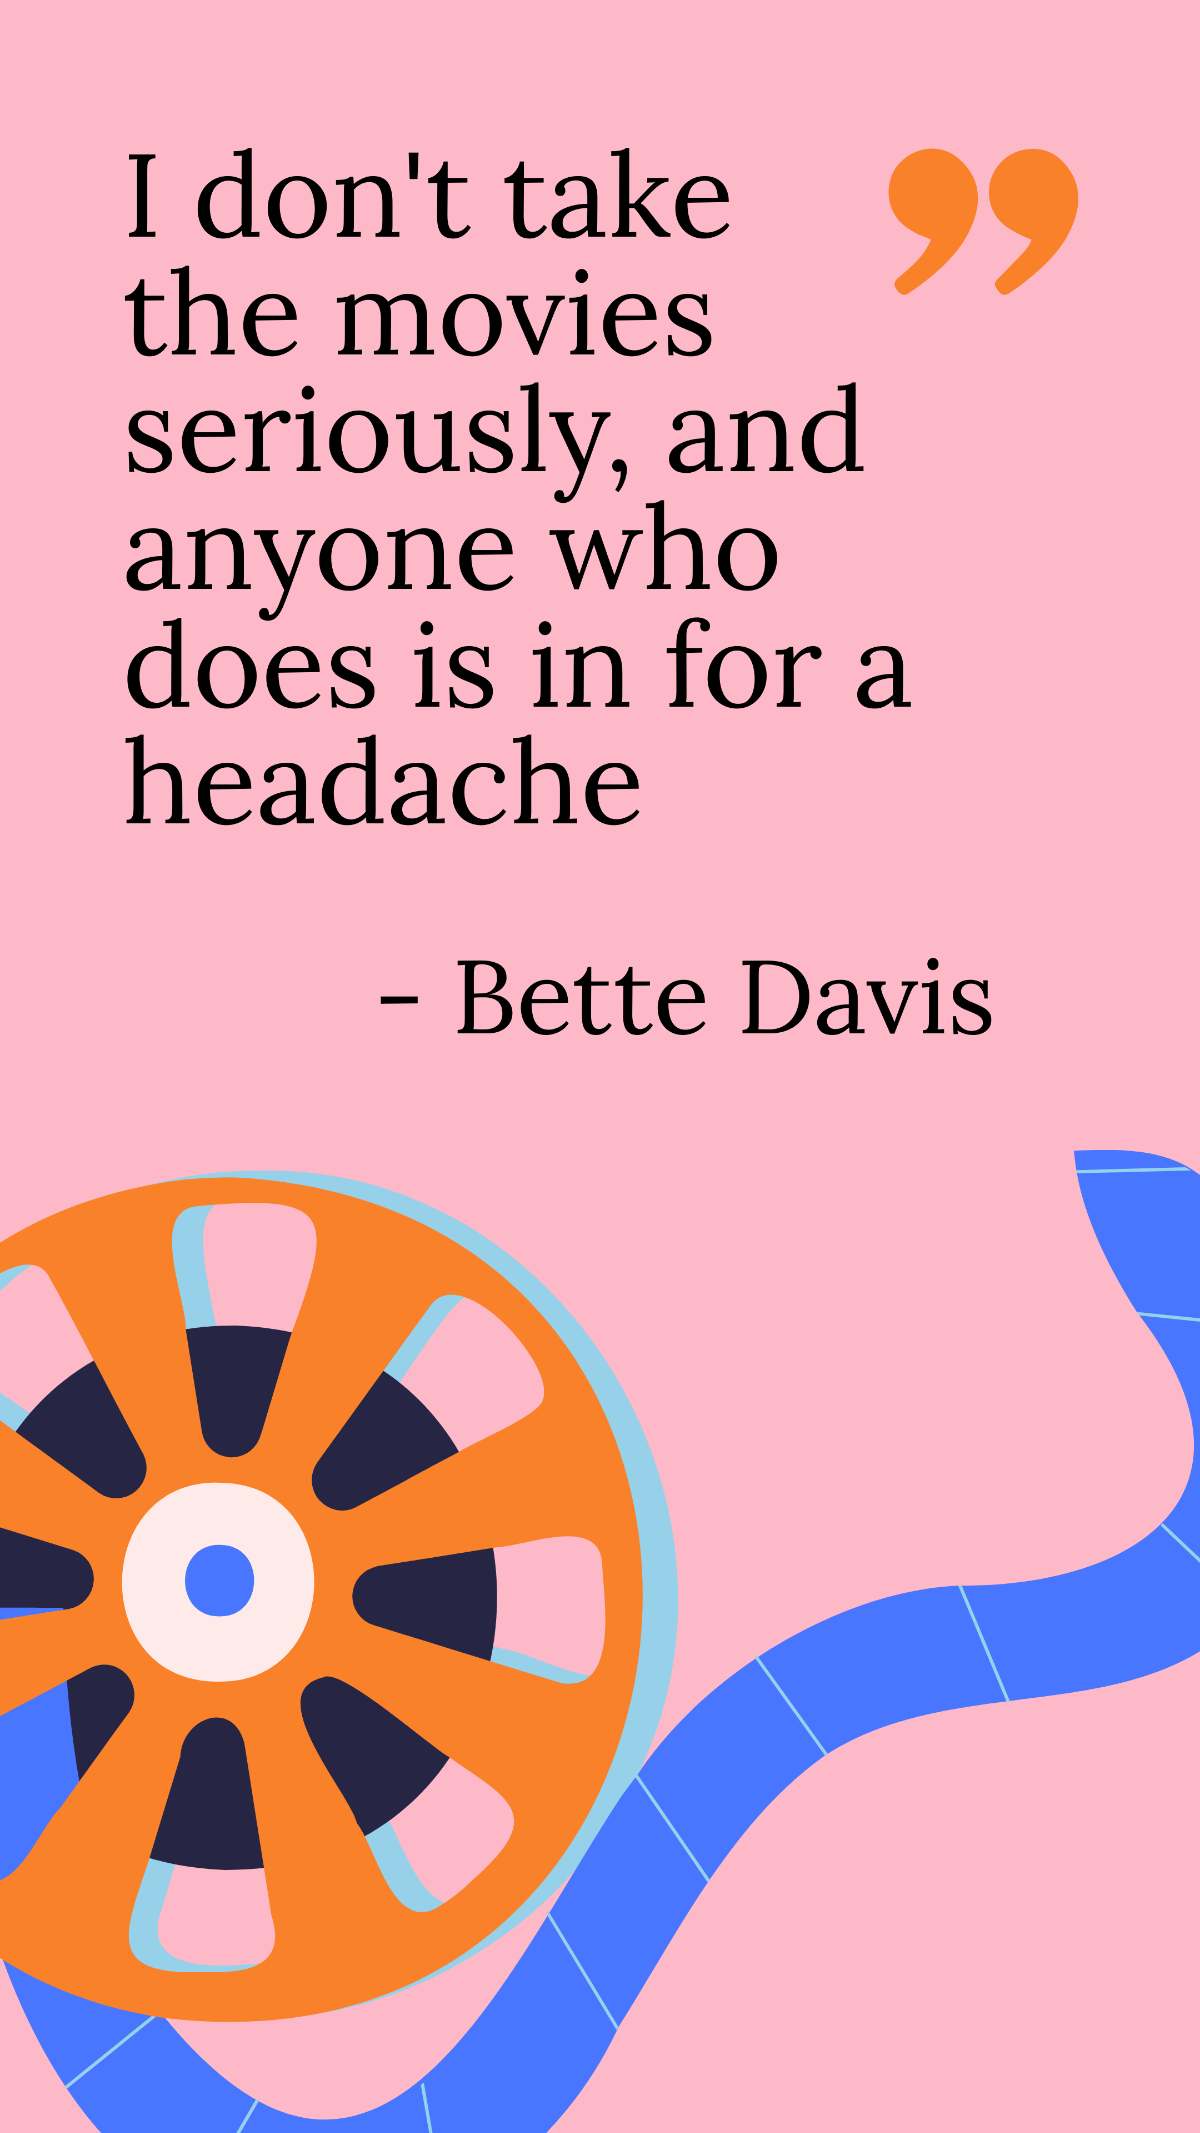 Bette Davis - I don't take the movies seriously, and anyone who does is in for a headache